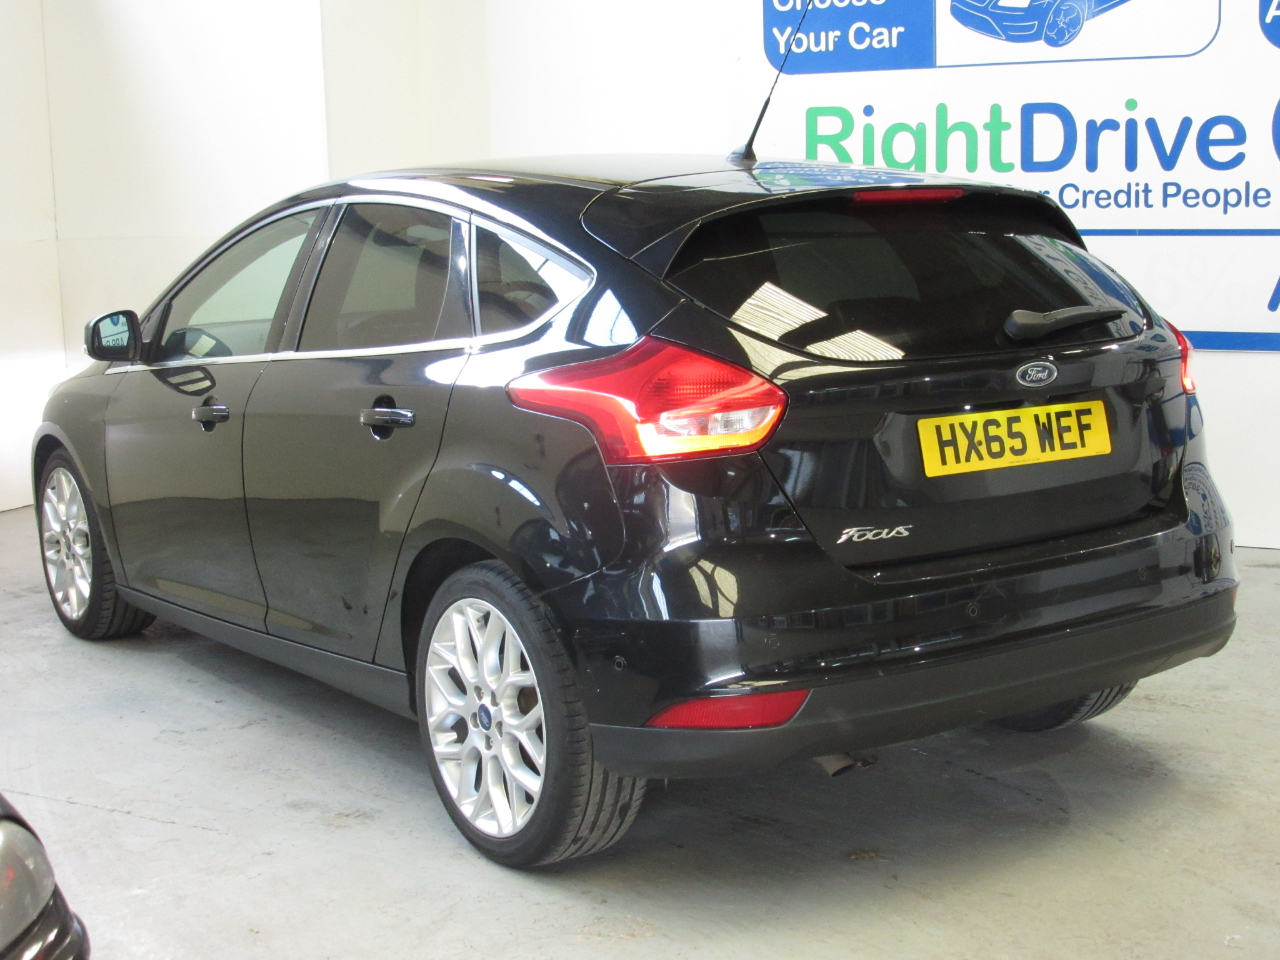 Ford Focus - Rightdrive Car Finance